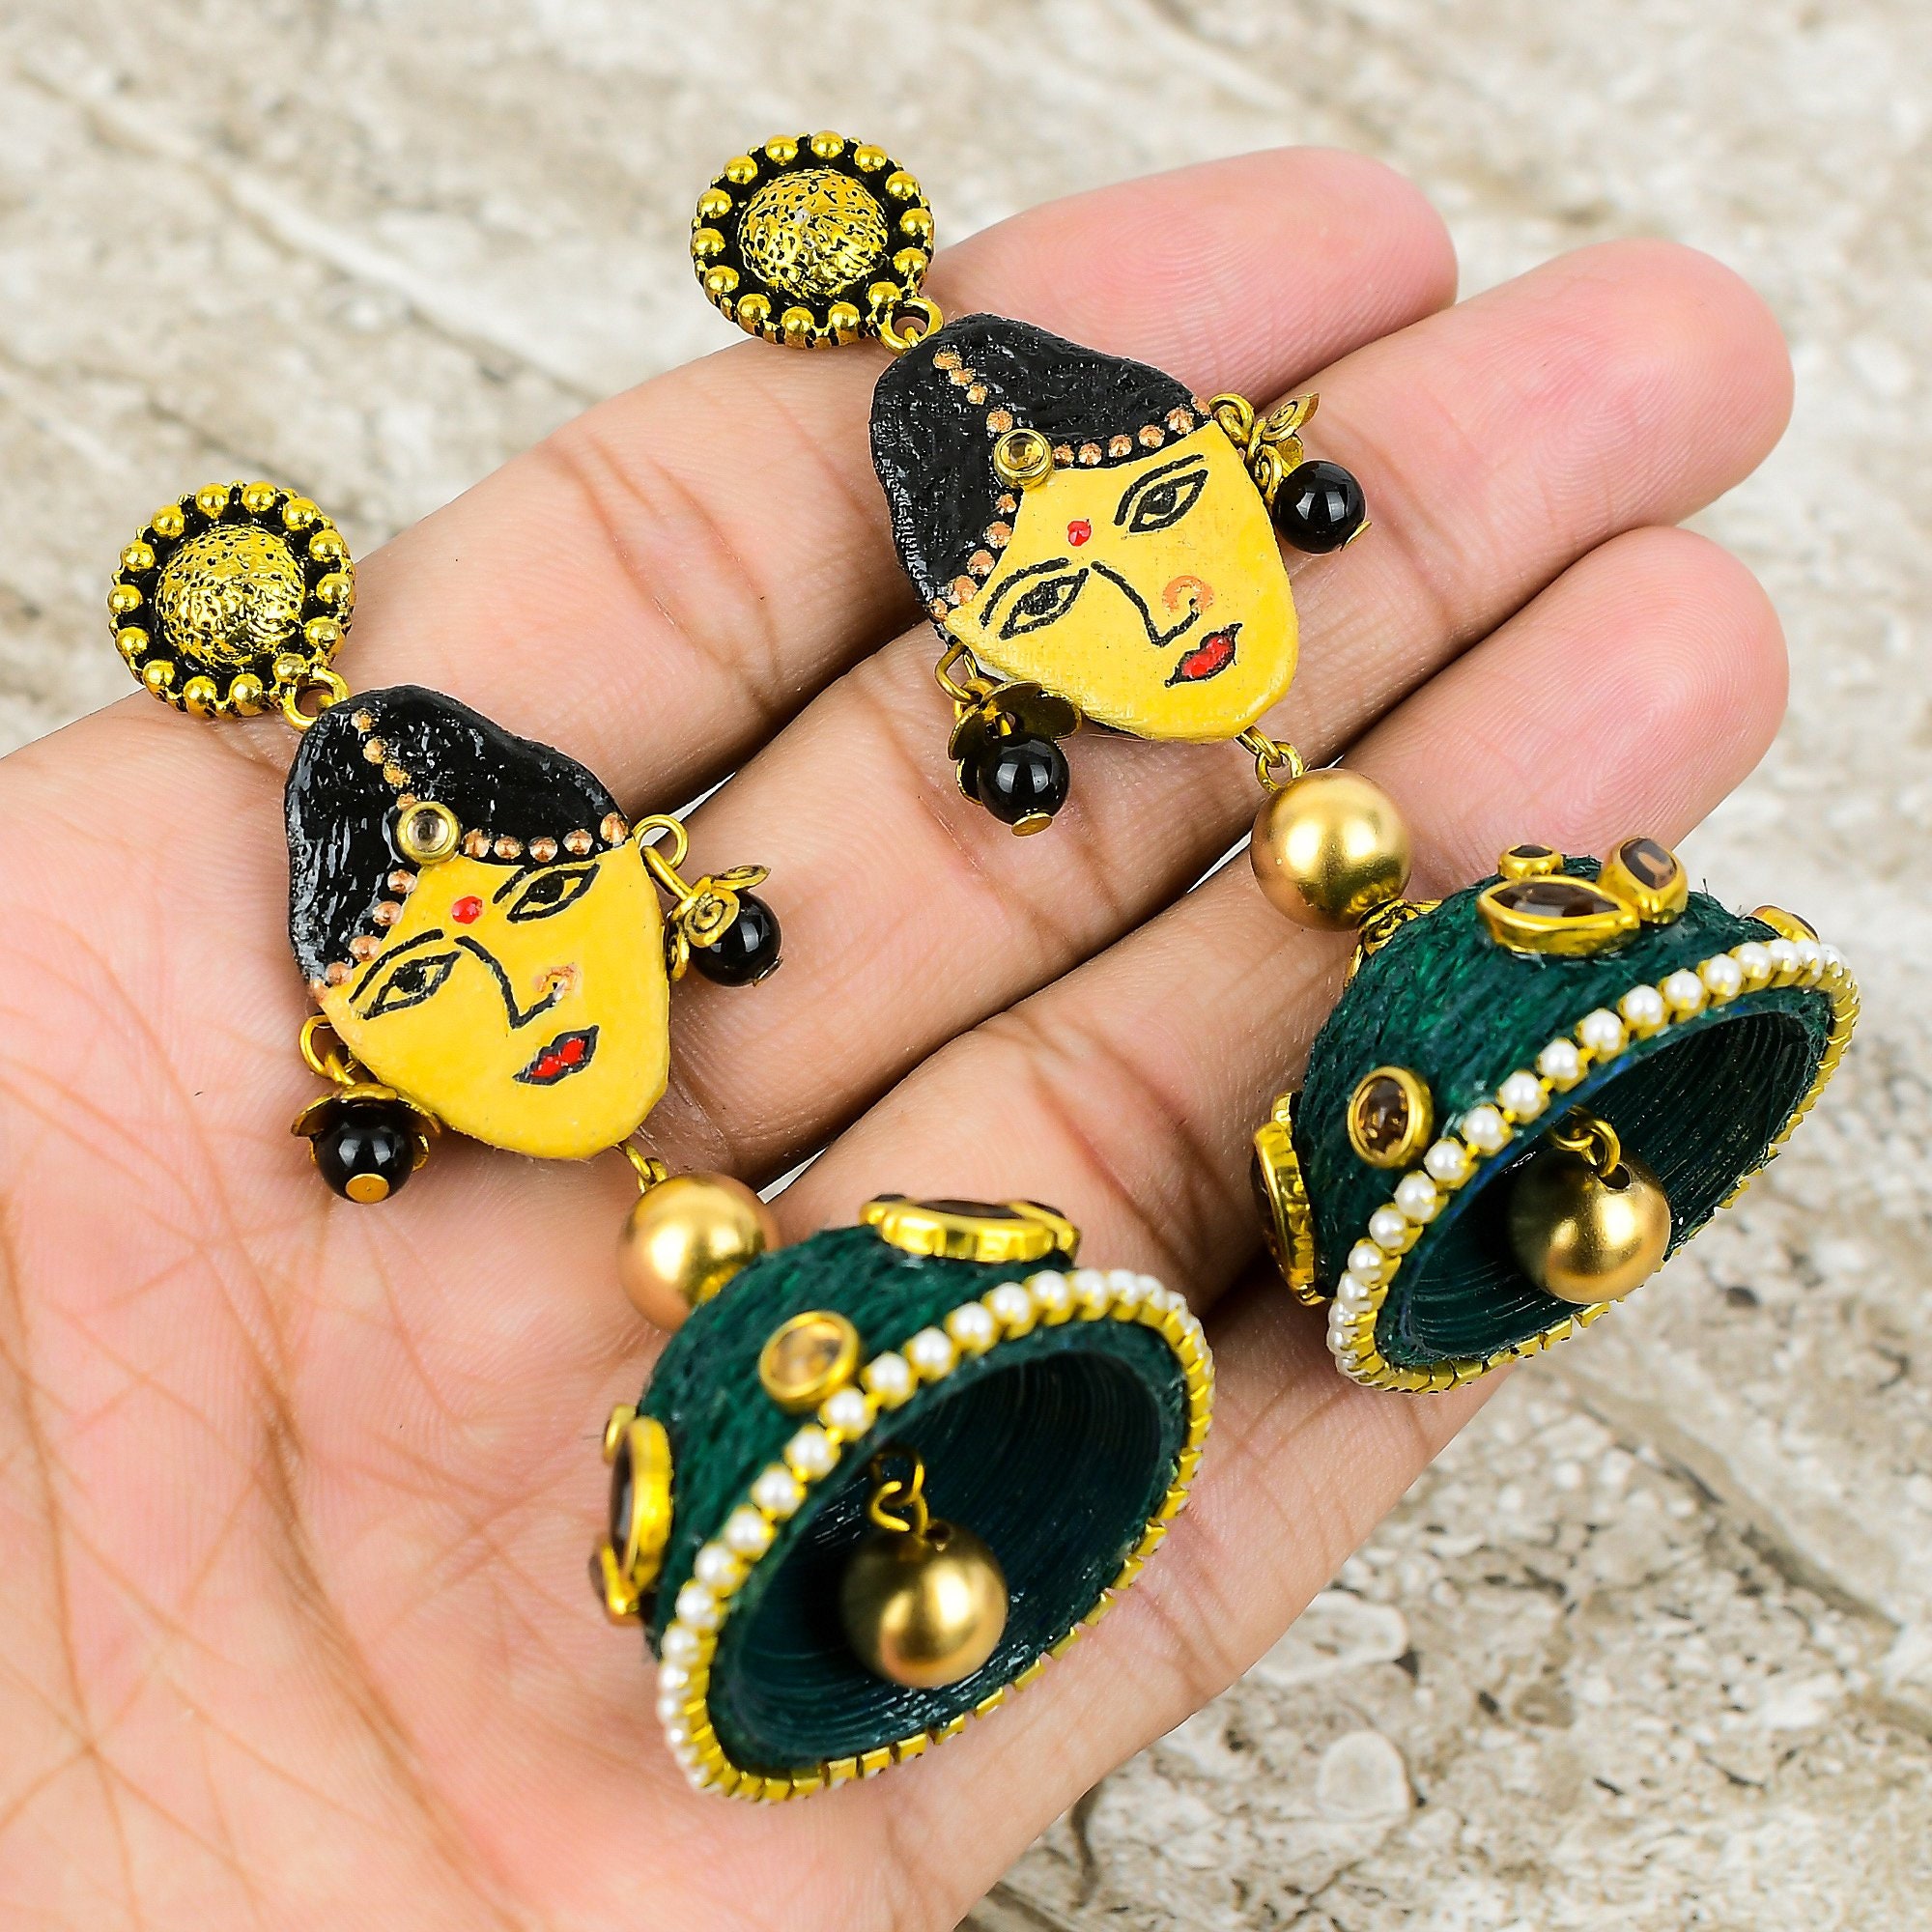 Floral Design Terracotta Earrings | Bloom at Rs 165 | Pune| ID: 26266552462